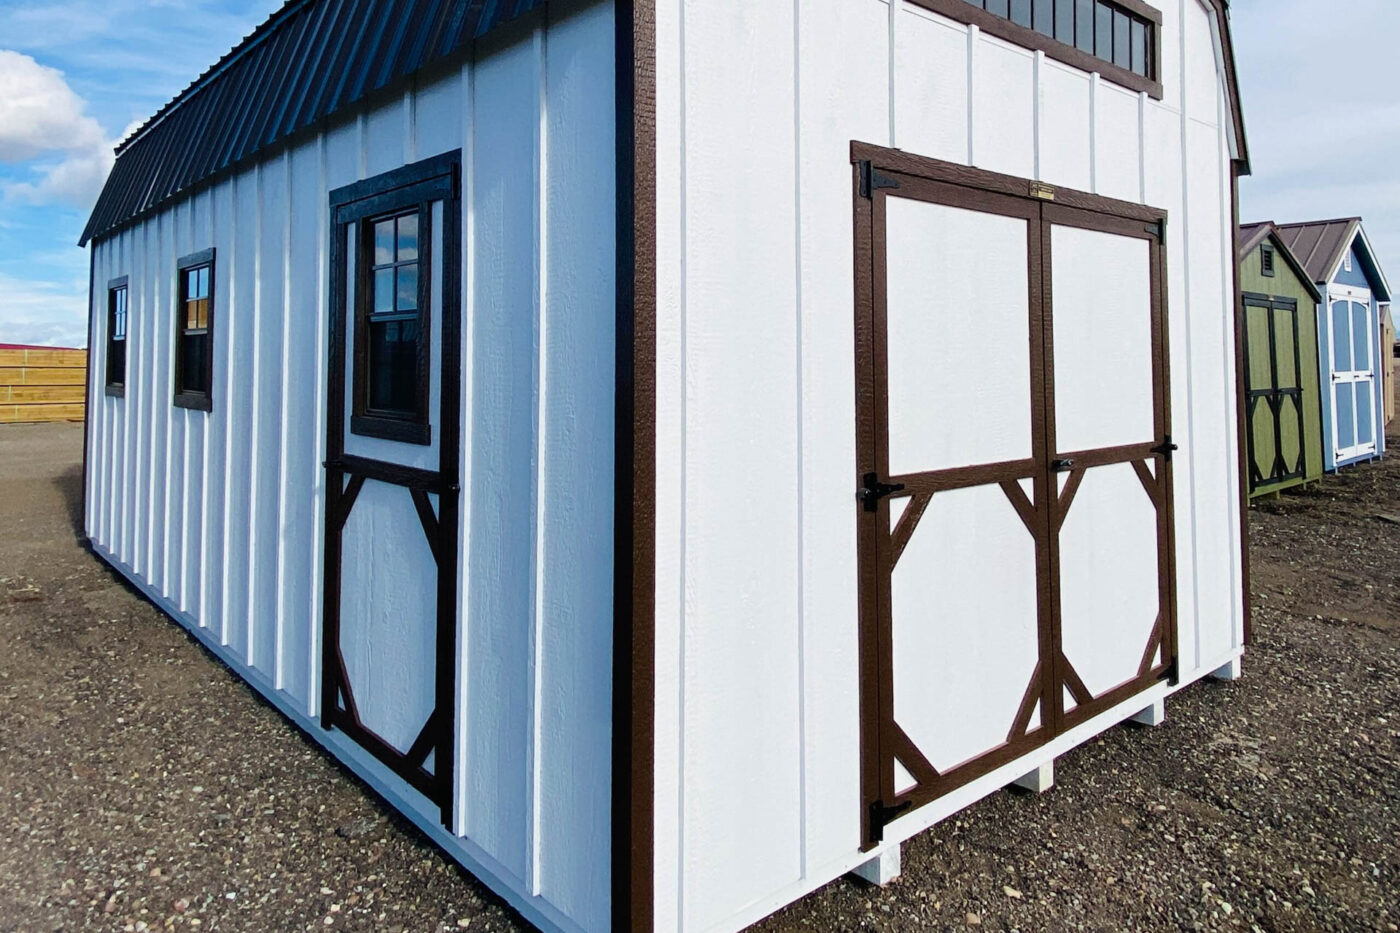 Sheds for sale in MT, WY, UT